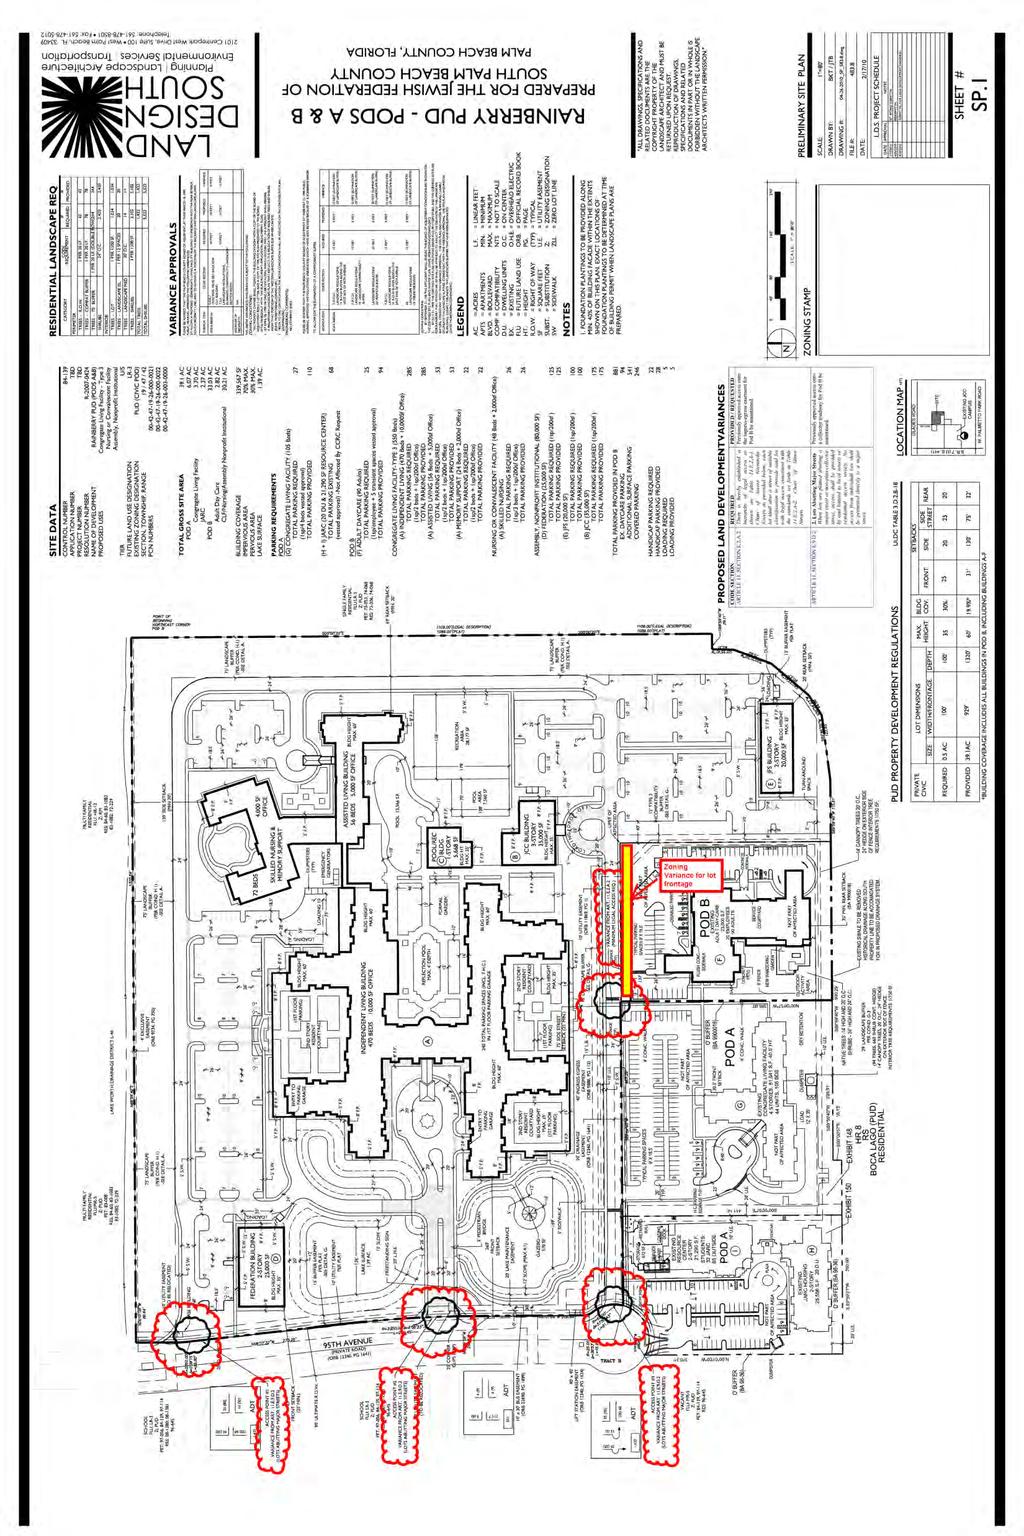 Figure 3 Preliminary Site Plan dated May 18, 2010